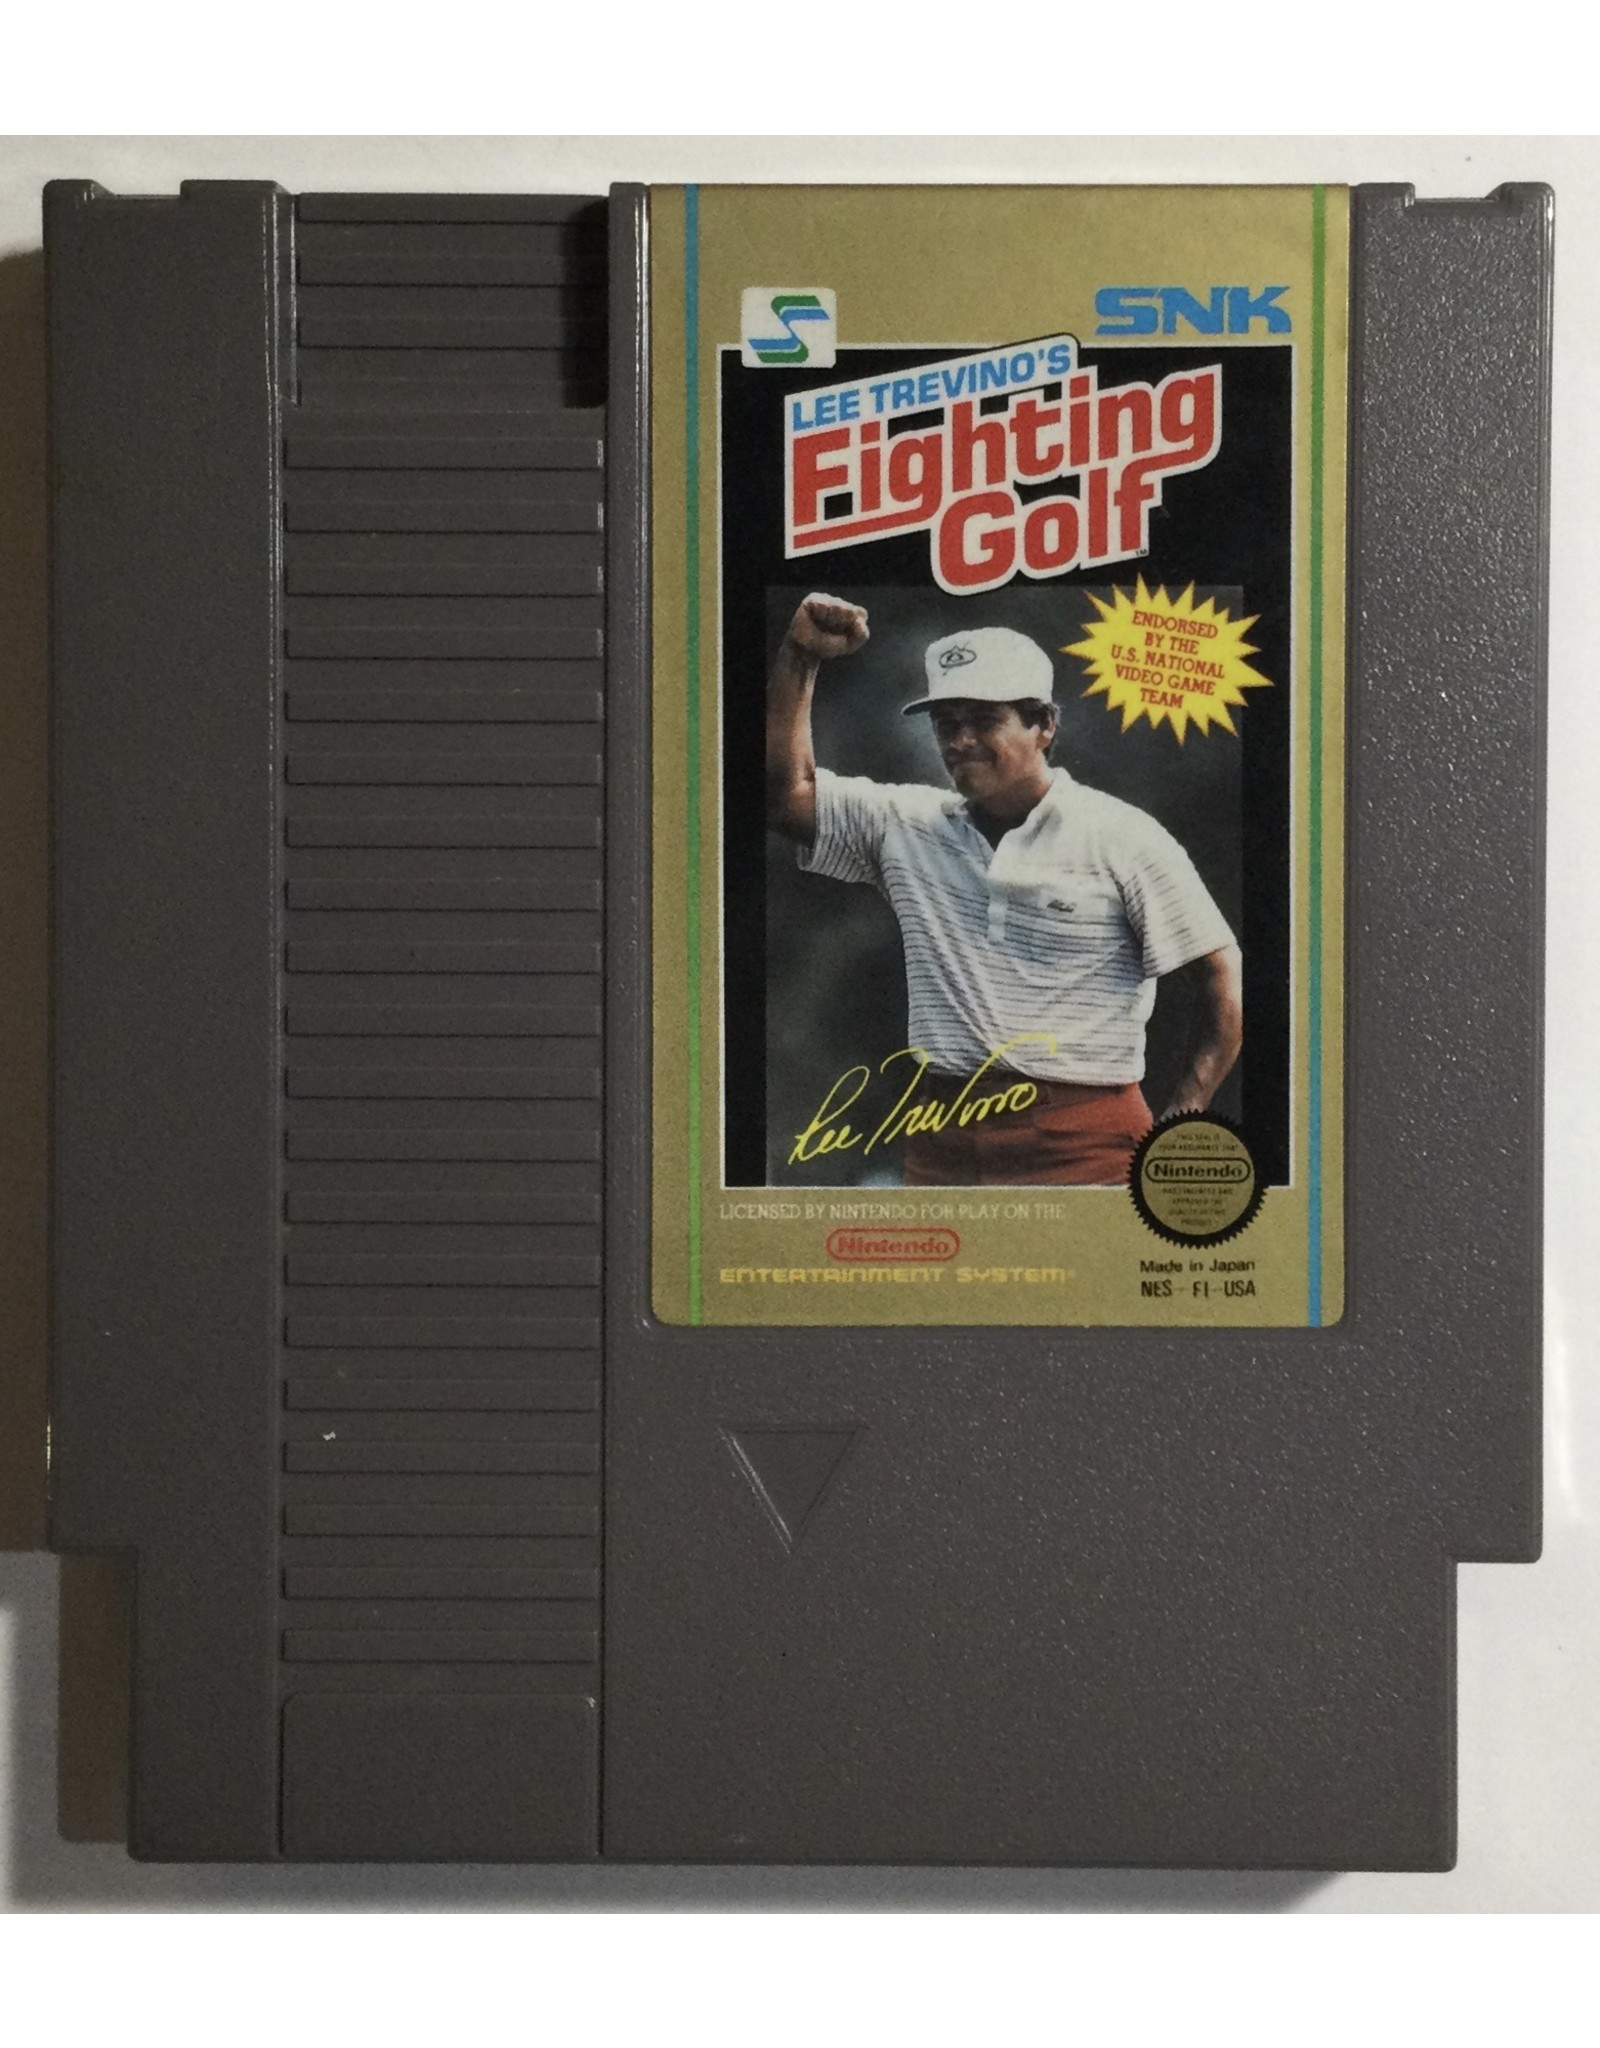 SNK Lee Trevino's Fighting Golf for Nintendo Entertainment system (NES)